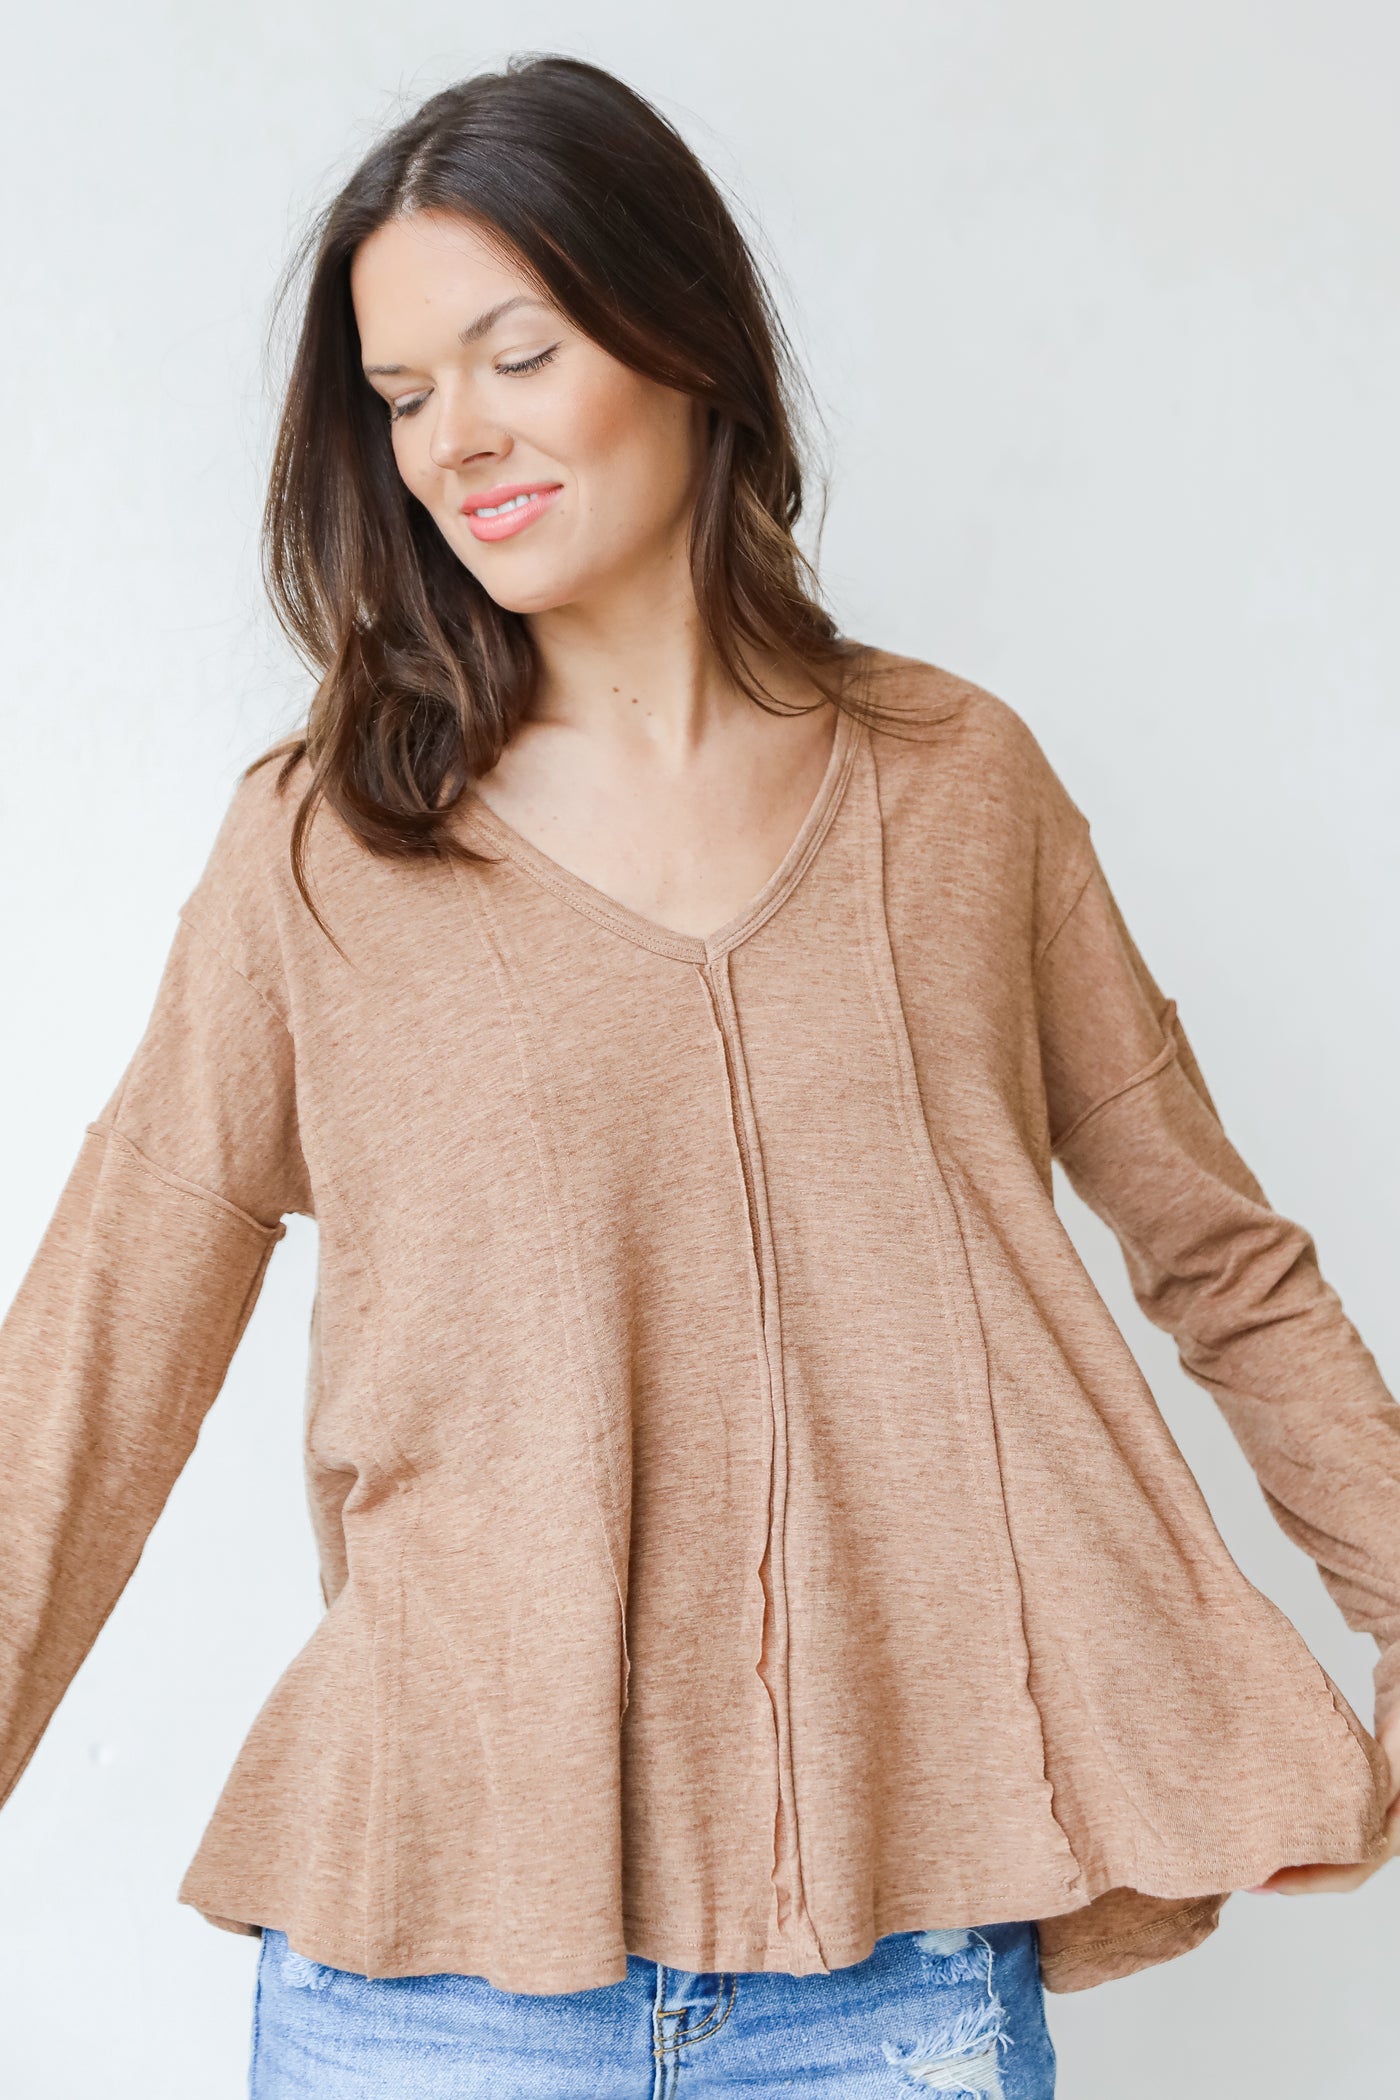 Jersey Knit Top in camel front view